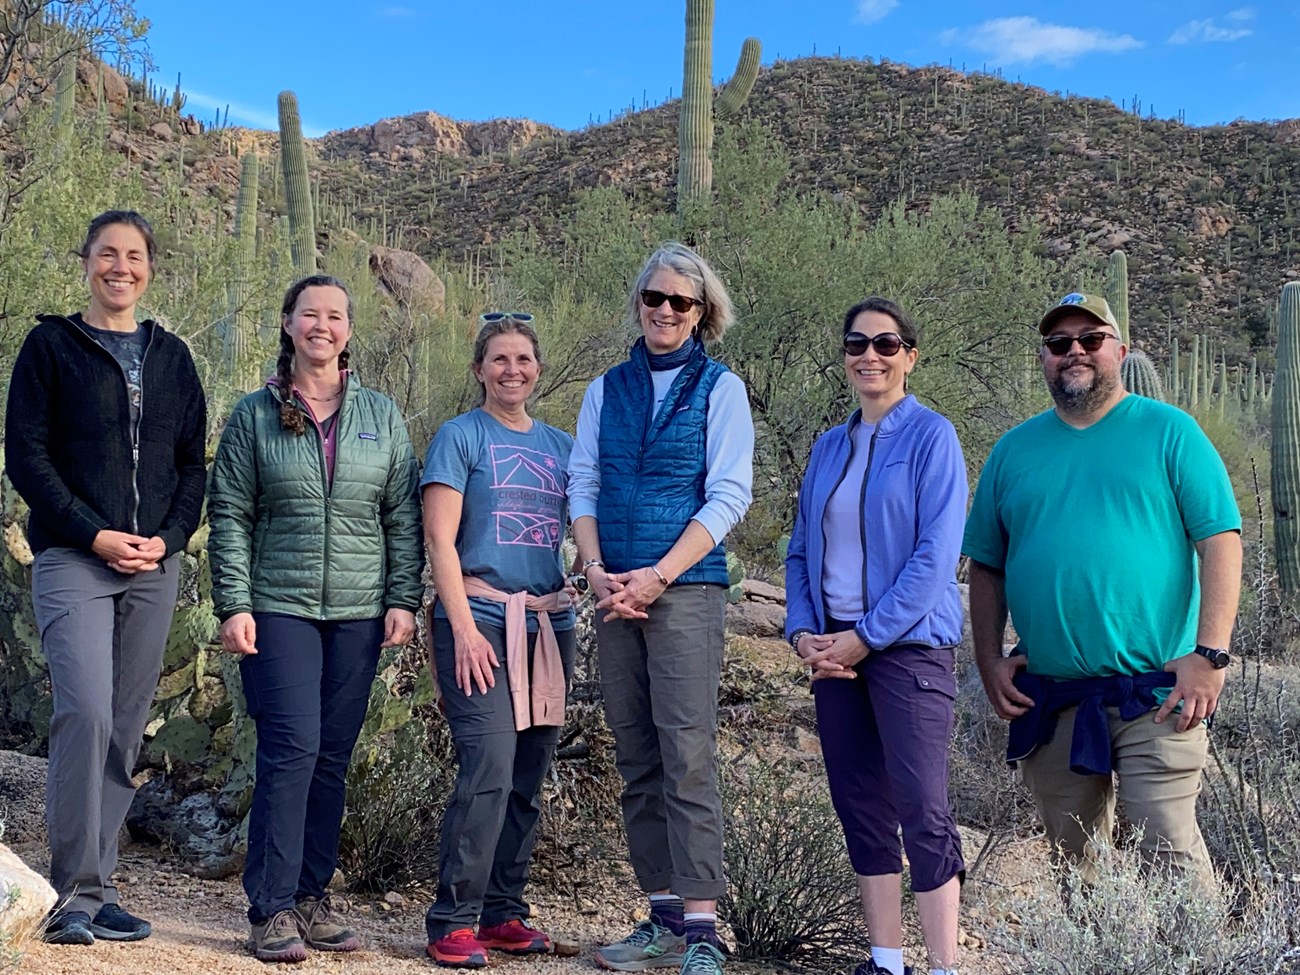 Group of six people with desert cactus in background